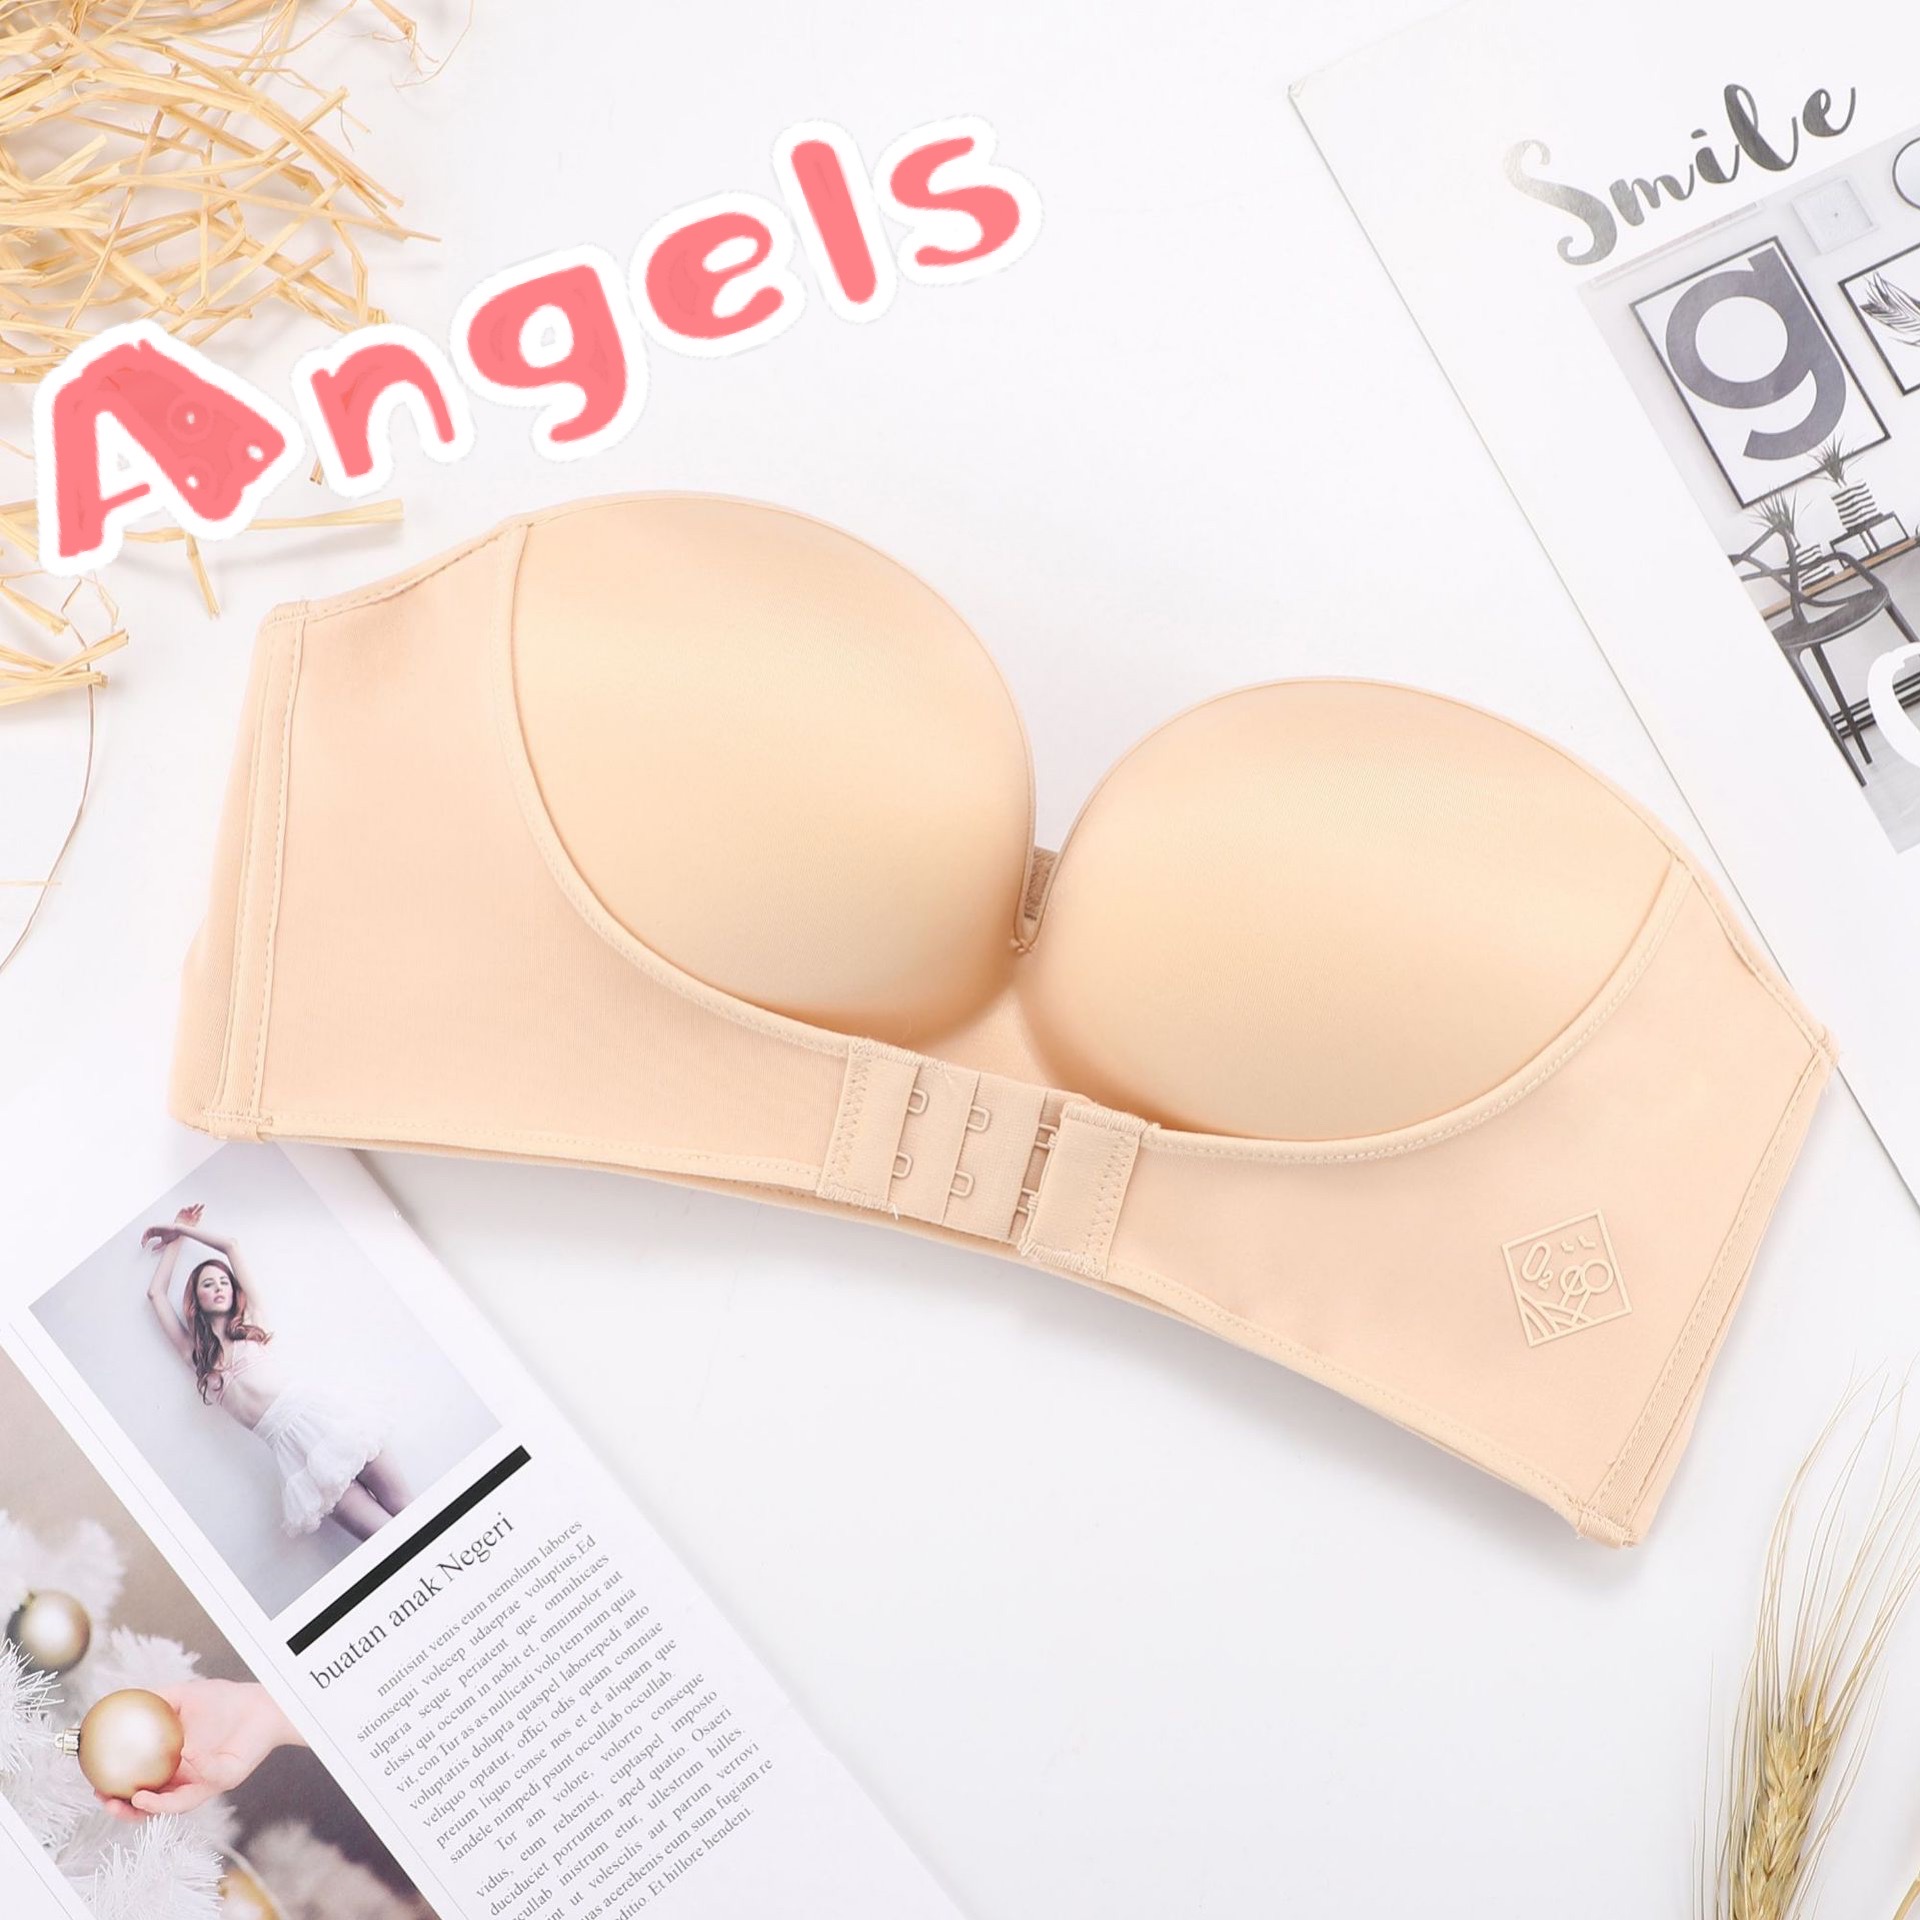 French strapless front buckle push-up bra